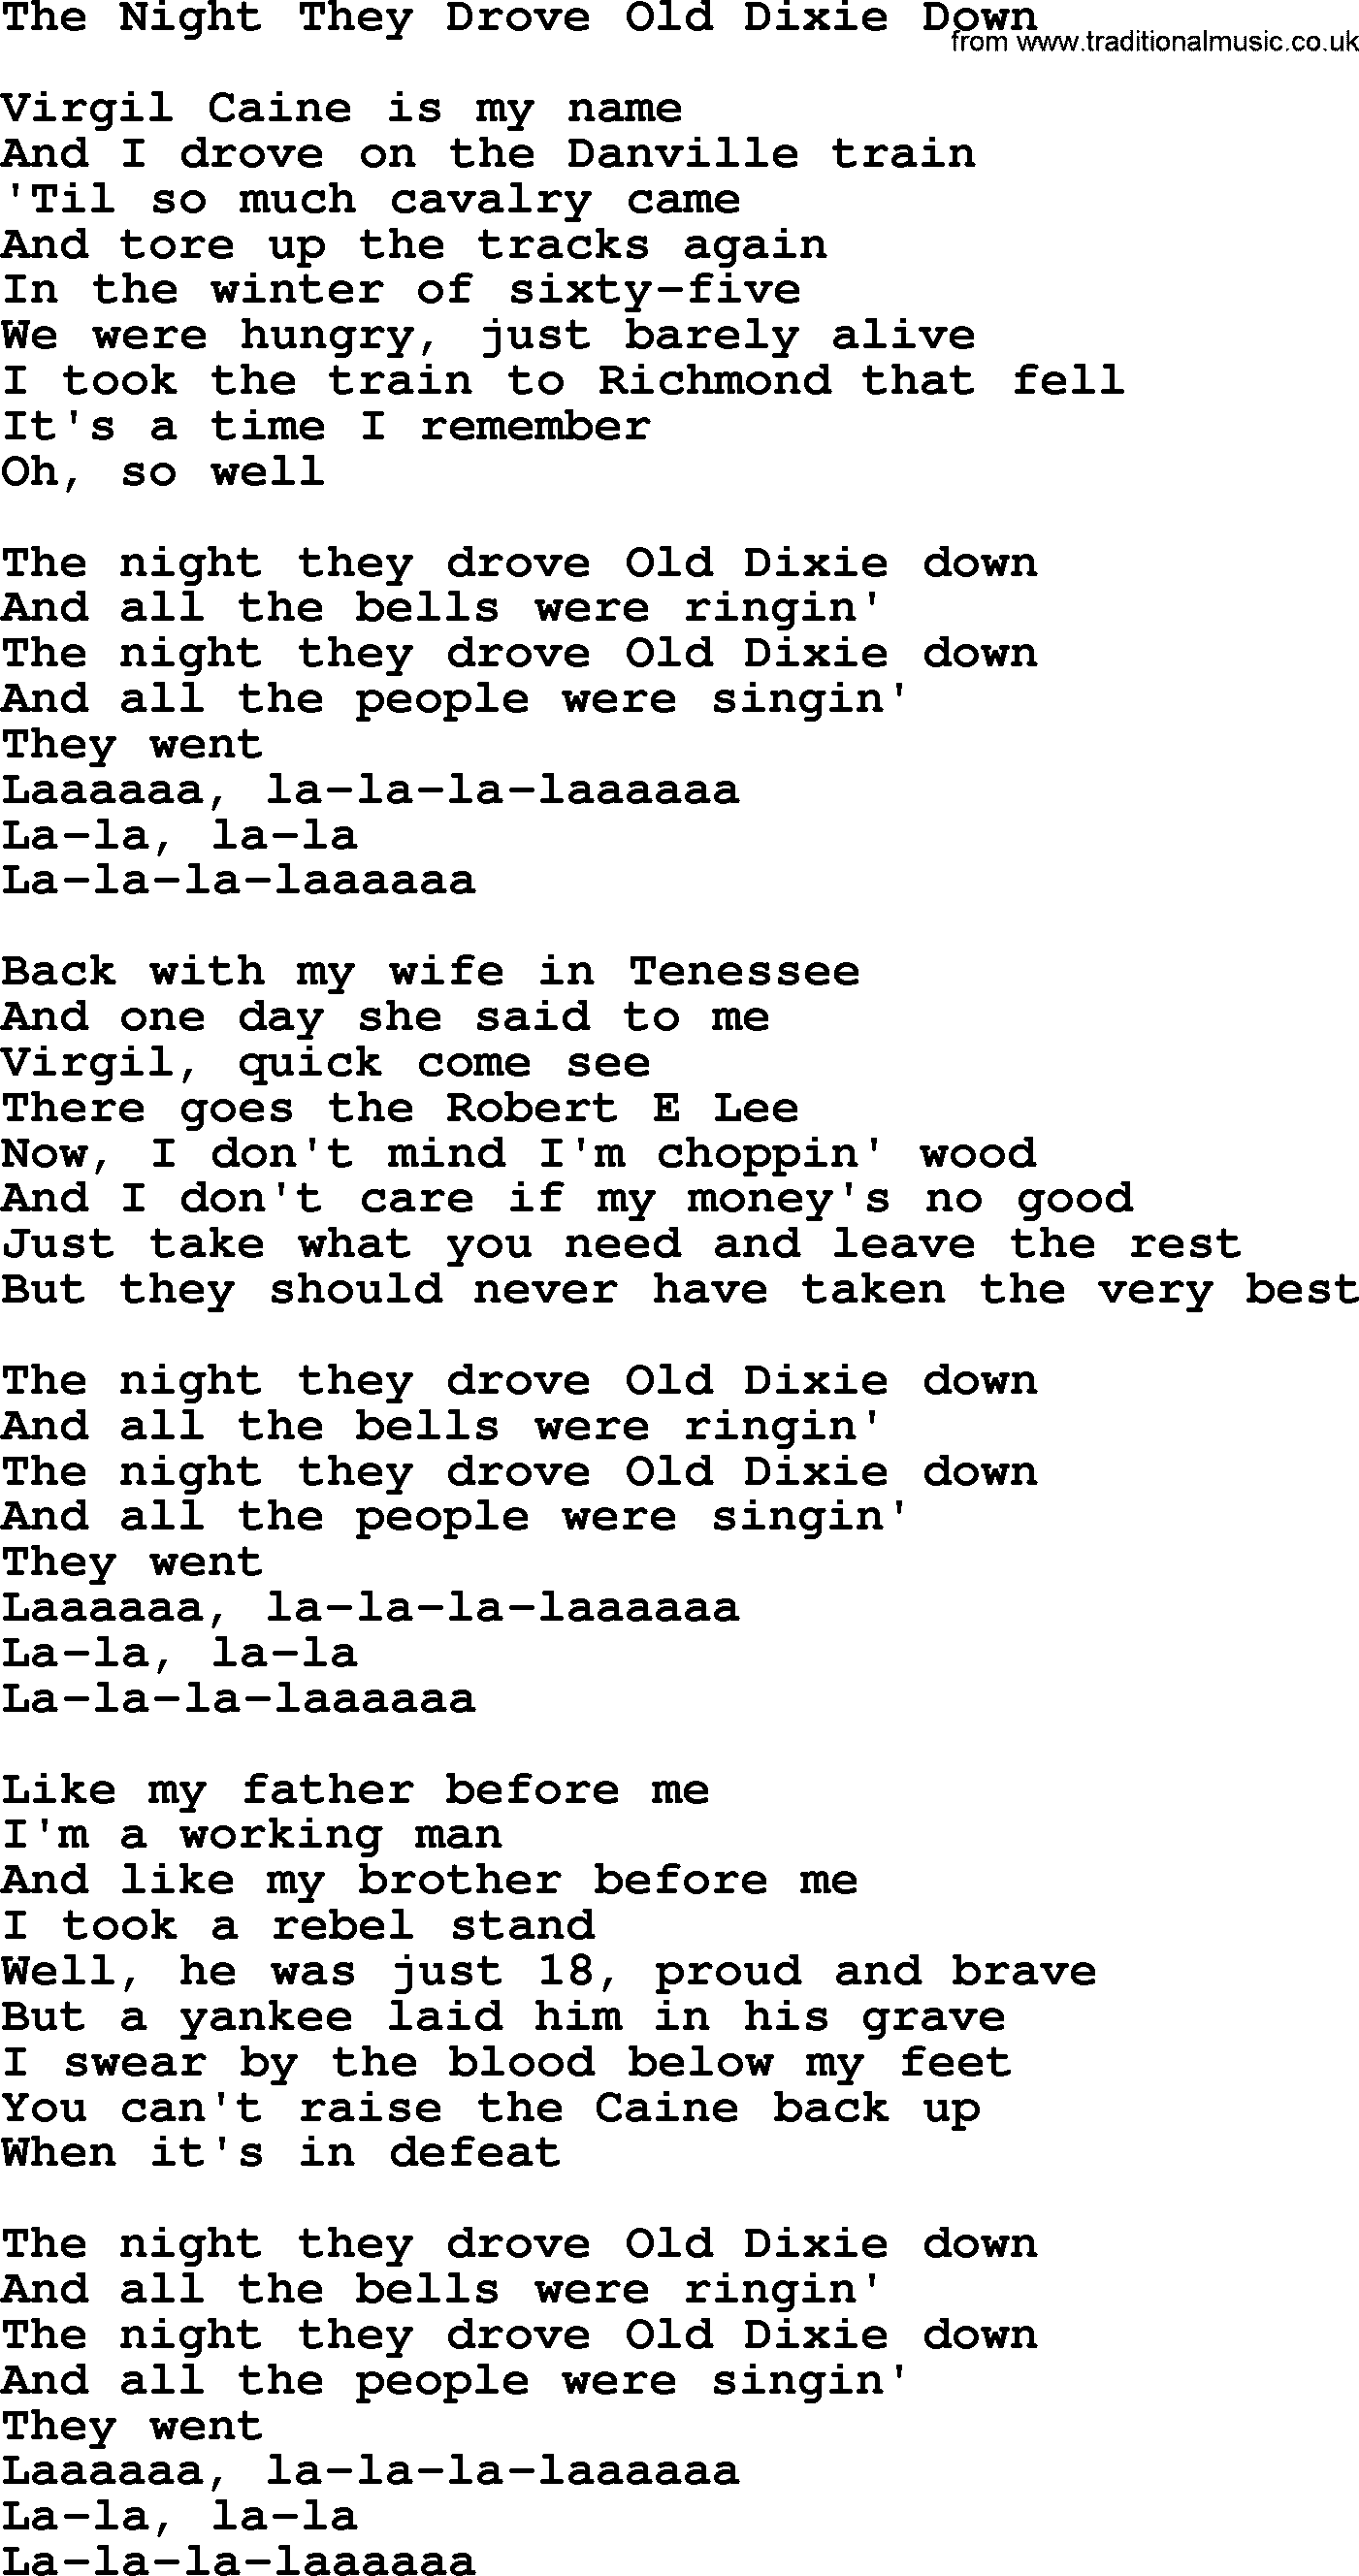 Joan Baez song The Night They Drove Old Dixie Down, lyrics